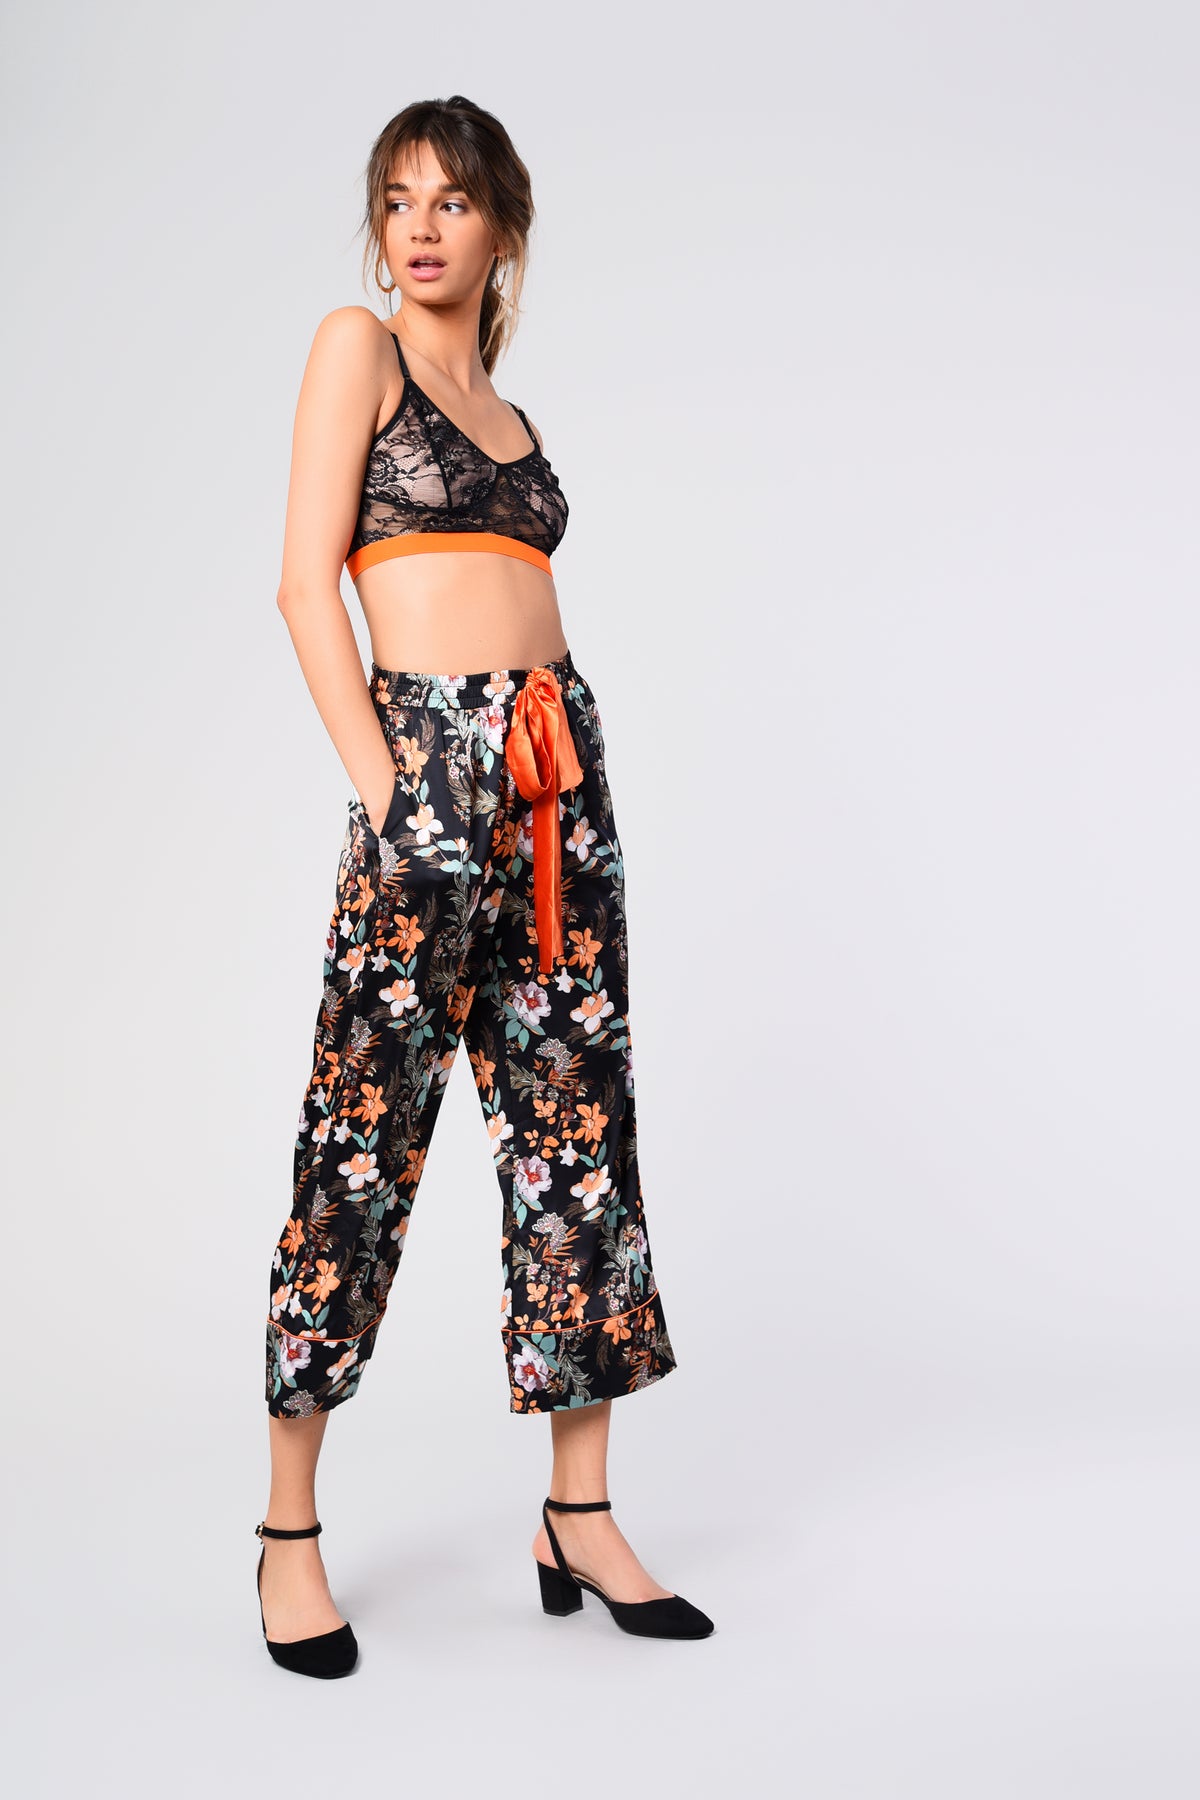 Glamorous Black Orange Floral Relaxed 3/4 Length Trousers